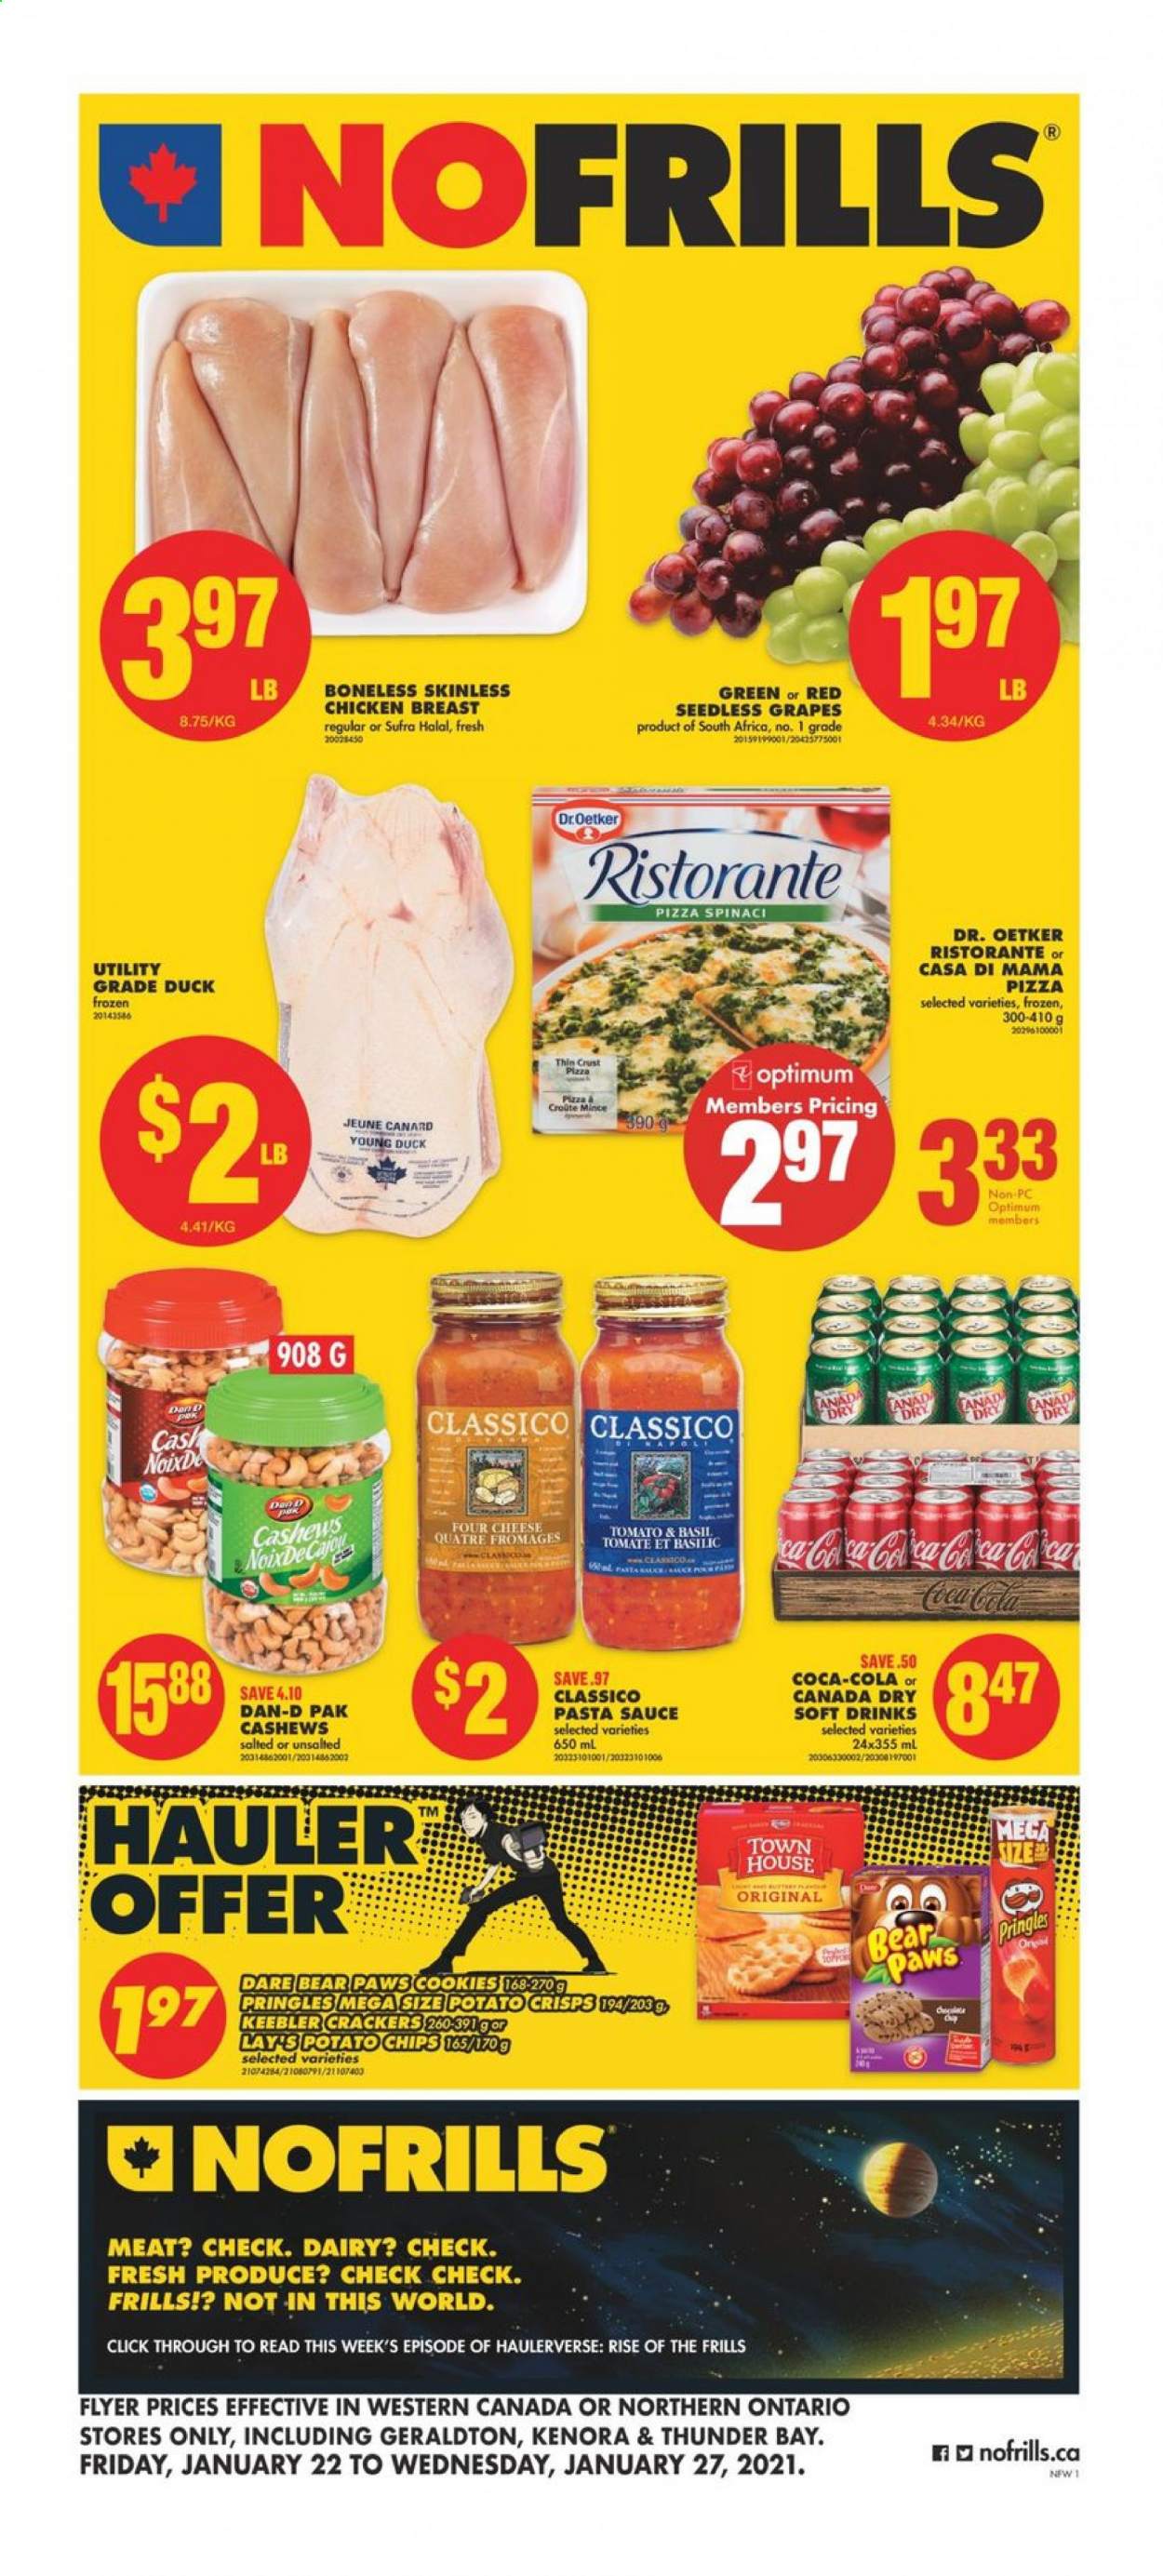 thumbnail - No Frills Flyer - January 22, 2021 - January 27, 2021 - Sales products - grapes, seedless grapes, pizza, pasta sauce, sauce, Dr. Oetker, cookies, crackers, Keebler, potato chips, Pringles, Lay’s, Dan-D Pak, Classico, cashews, Canada Dry, Coca-Cola, soft drink, chicken breasts, chicken, Paws, Optimum. Page 1.